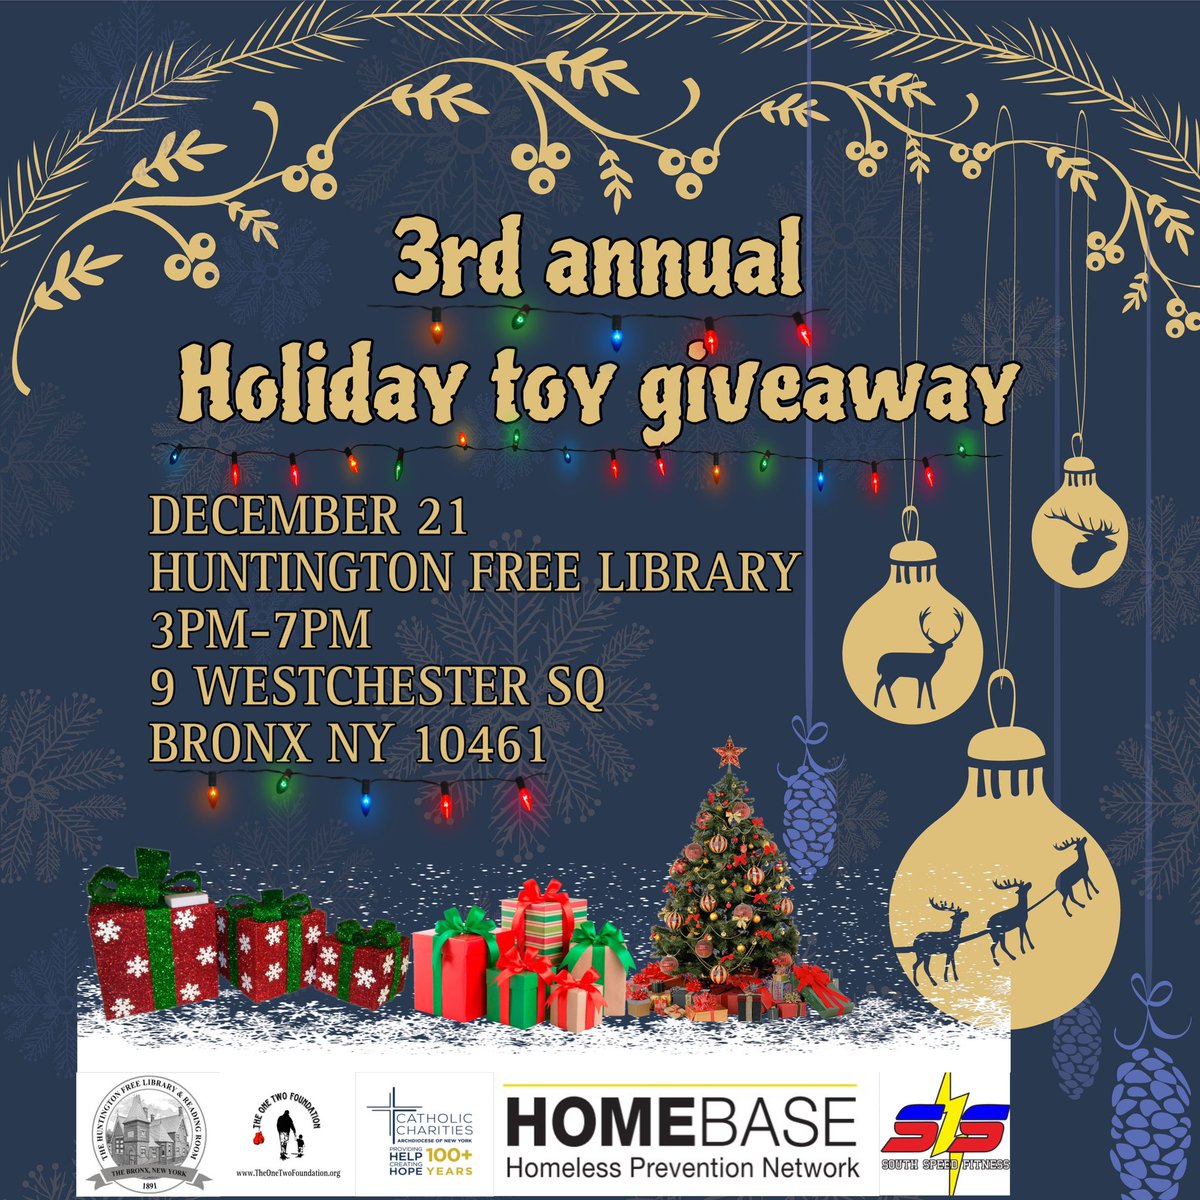 Attention! #thebronx we are having our 3rd annual holiday toy giveaway this Today at the @HuntingtonFree library from 3pm-7pm parents must have their child present to receive their toy, for more information please DM us🎄 #nyc #nyctoygiveaway #nycgiveaway #nycfree